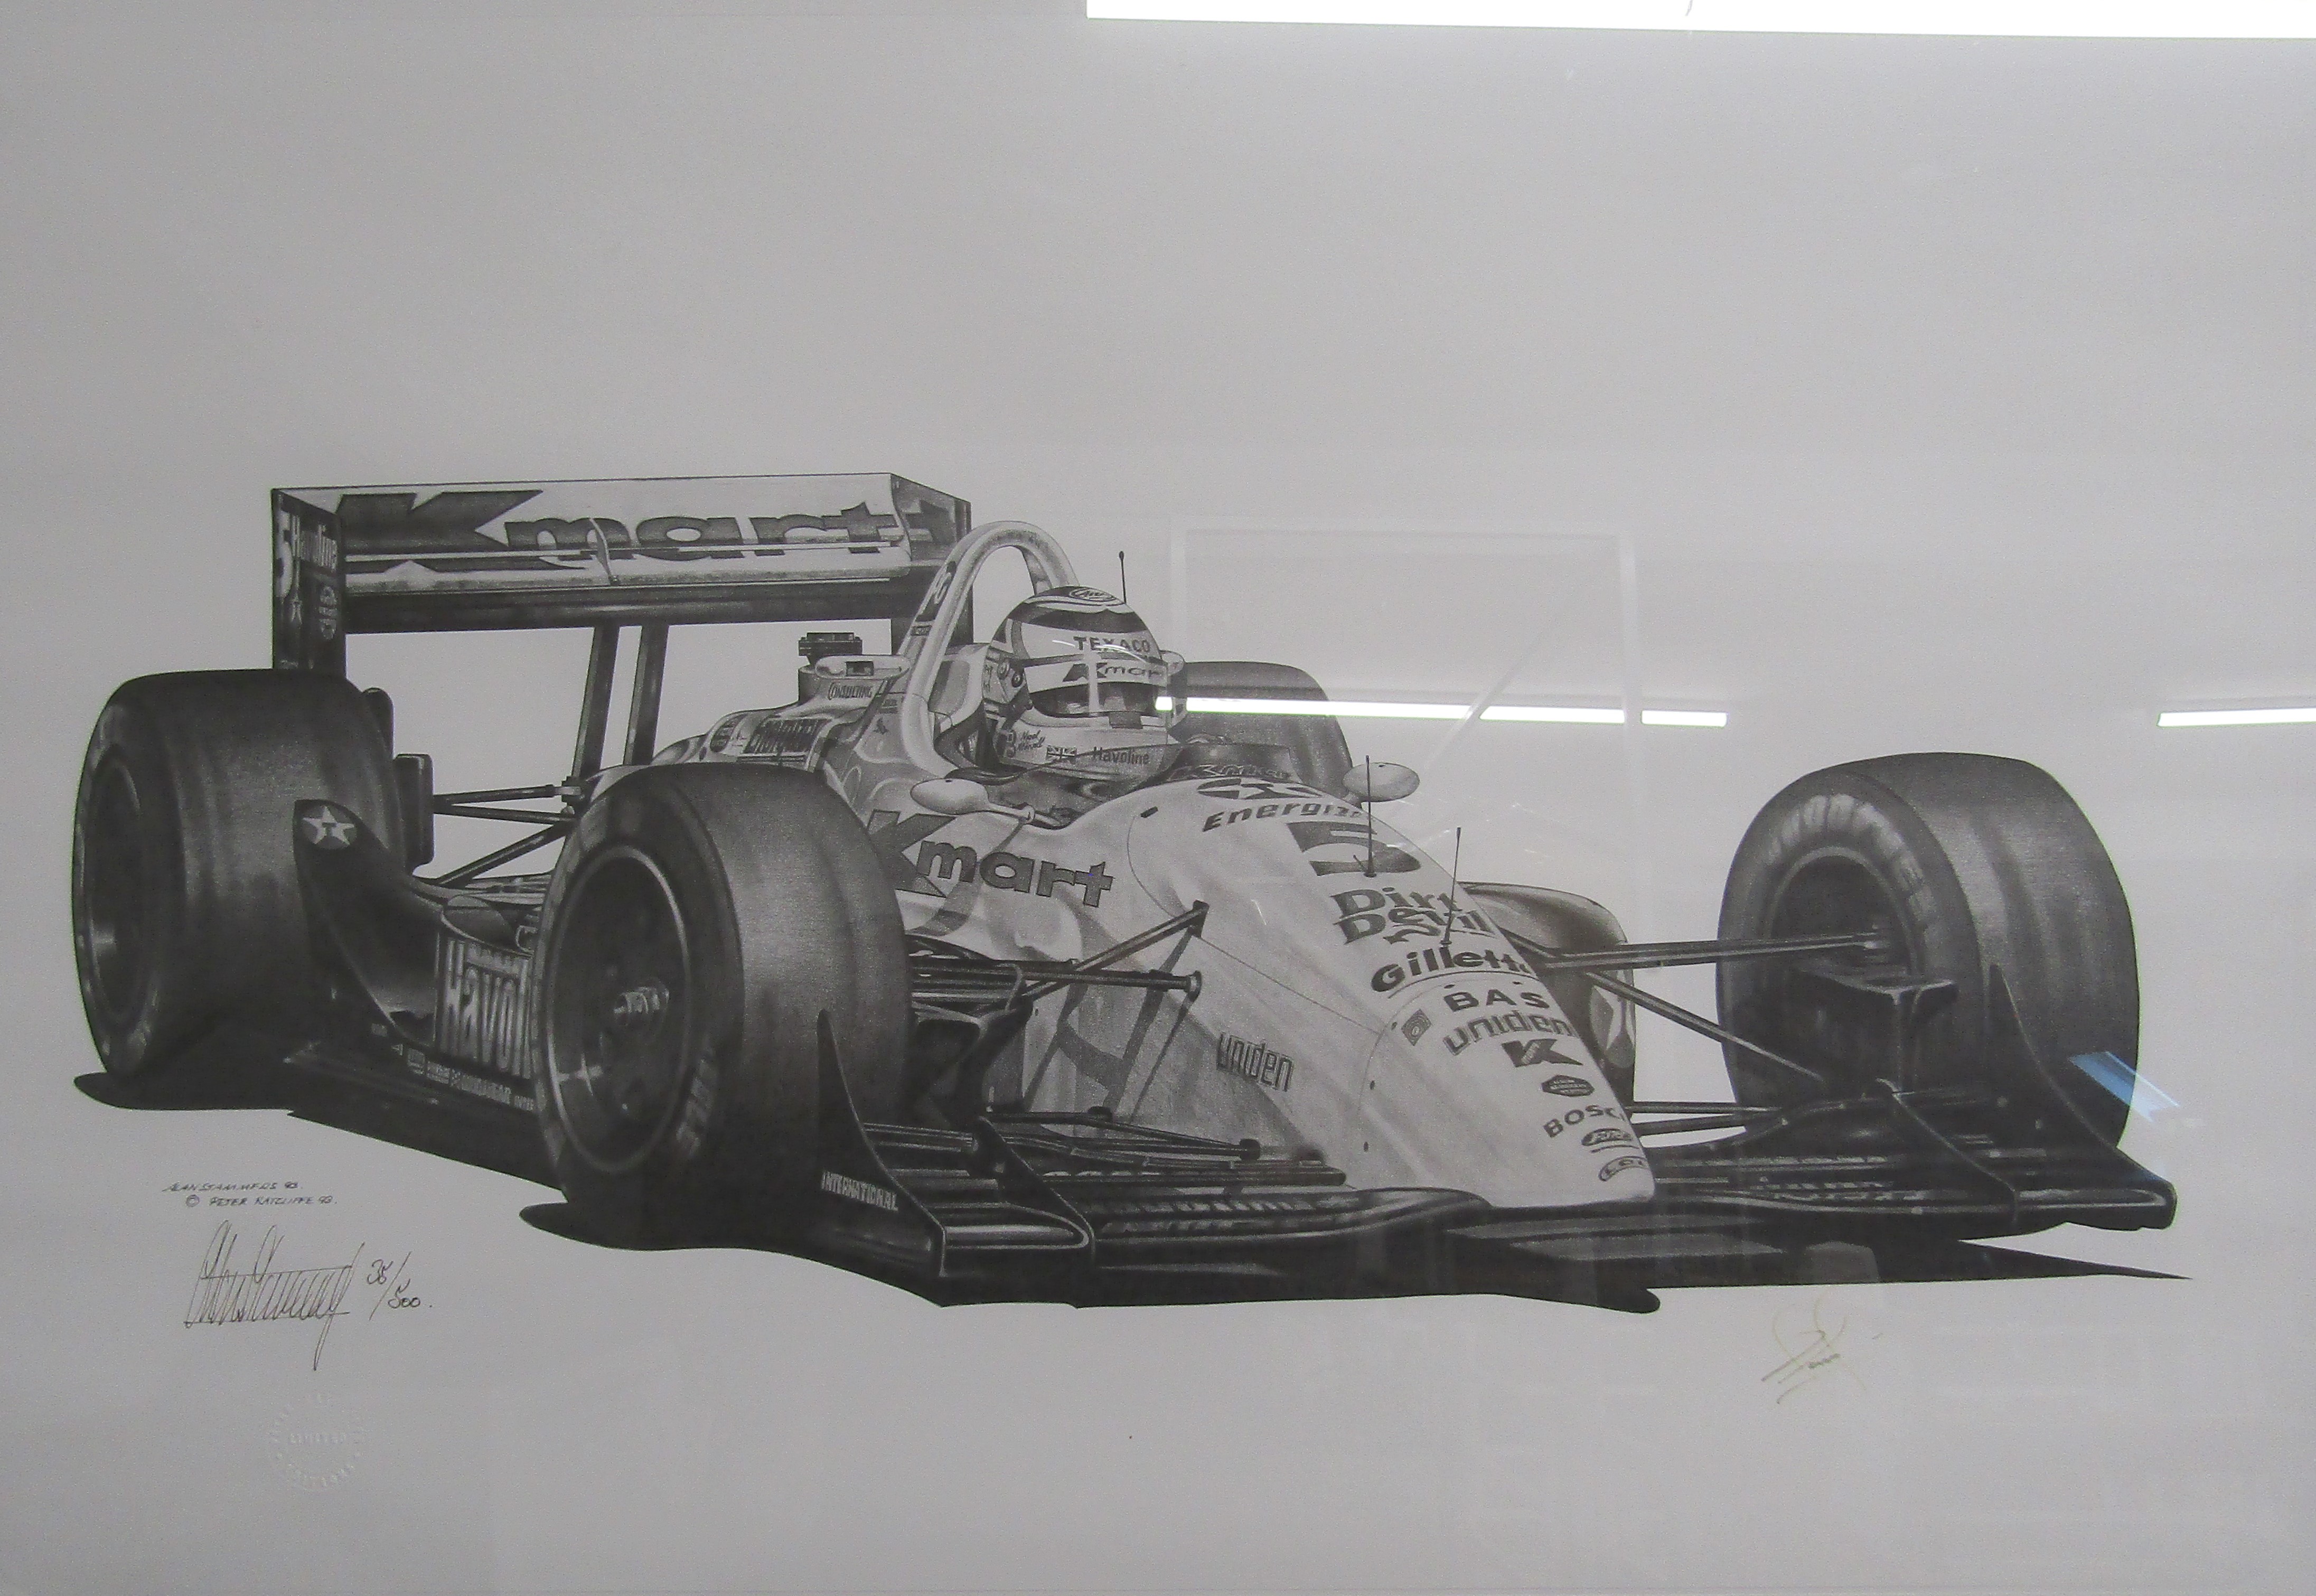 Peter Ratcliffe limited editions - Alan Stammers '93 35/500 framed Nigel Mansell signed print, - Image 4 of 6